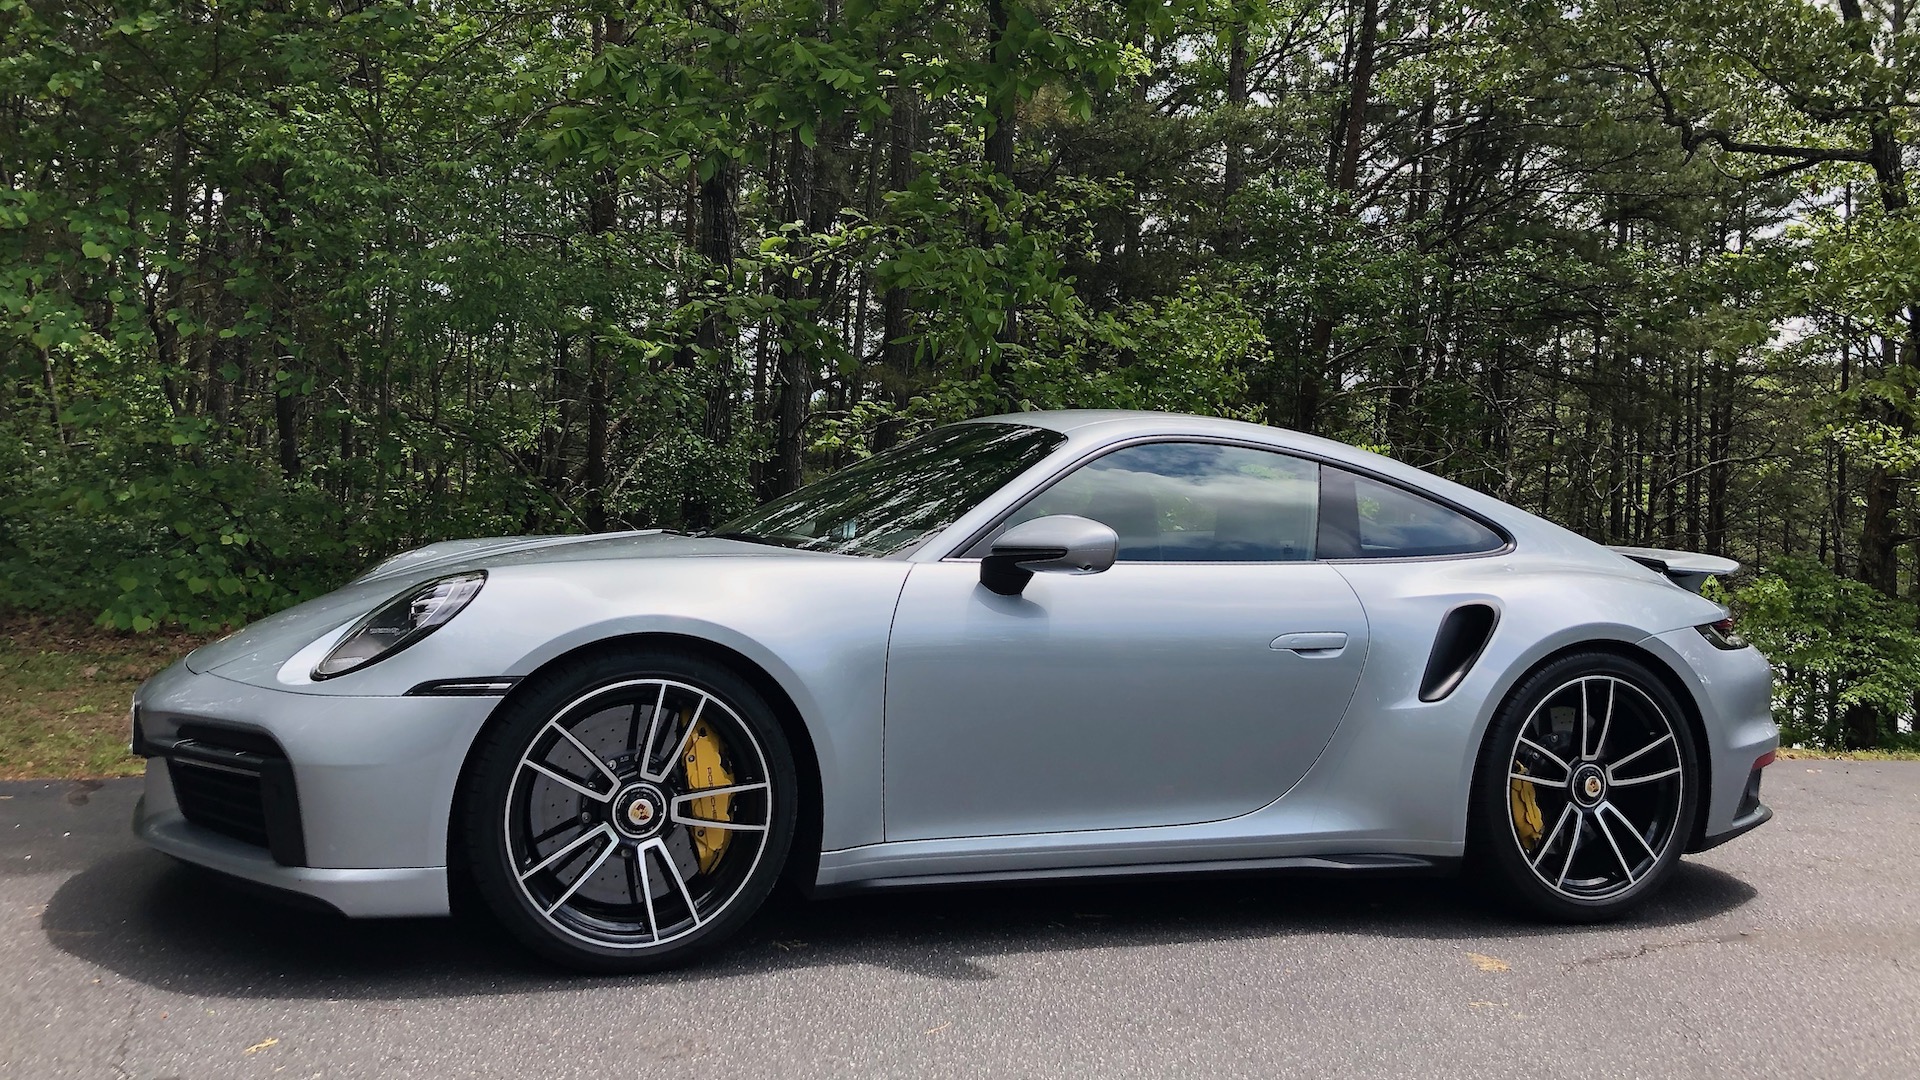 First drive review: The 2021 Porsche 911 Turbo S jolts us with megawatt